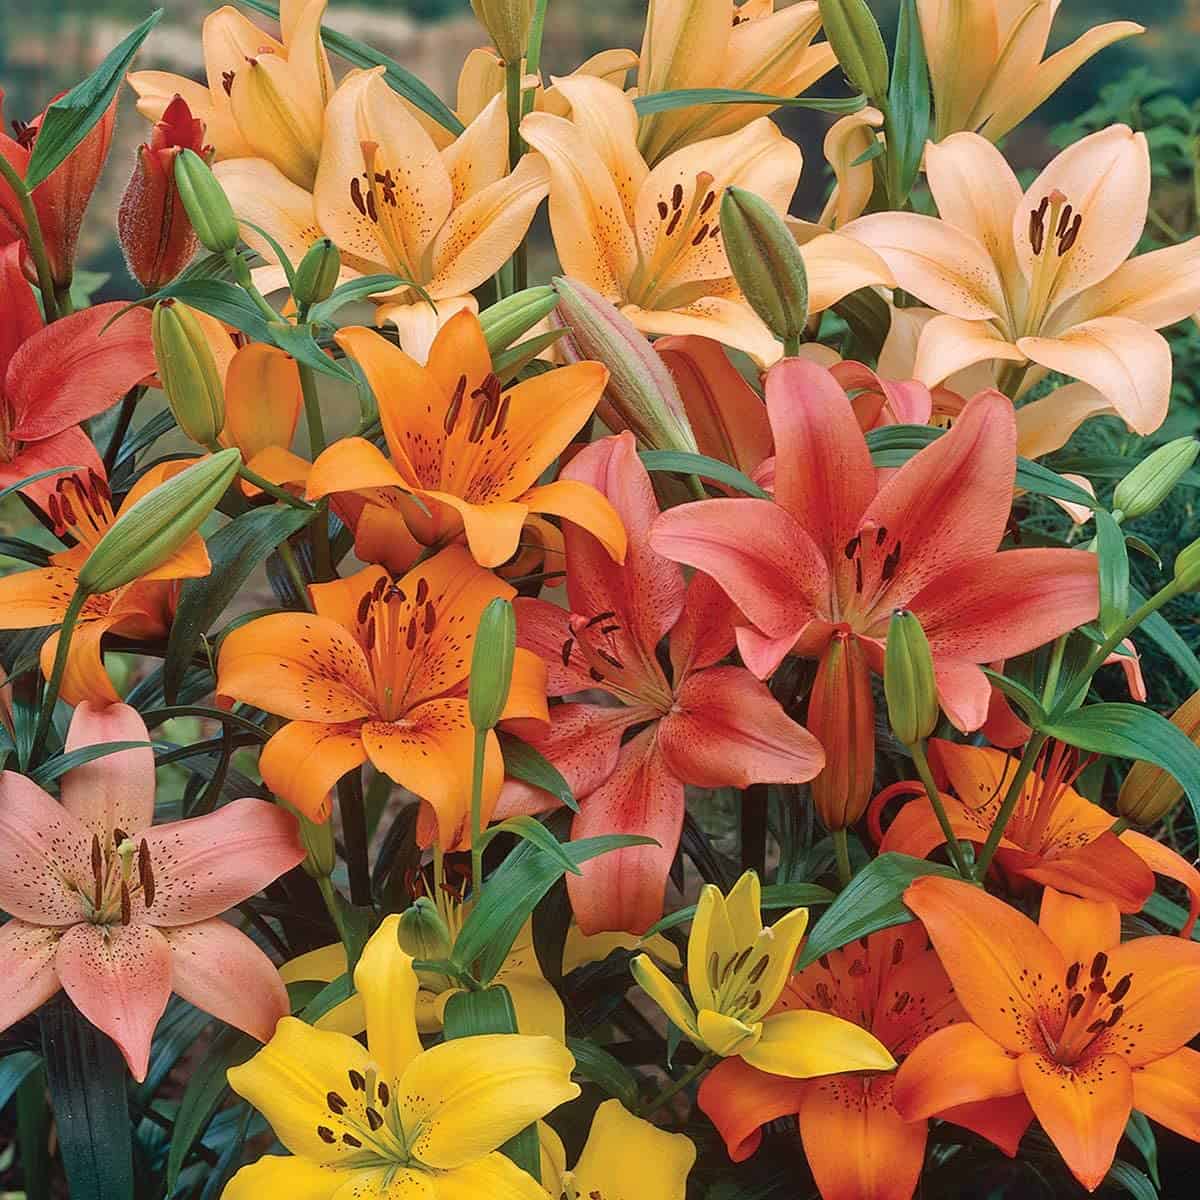 Burpee Perennial Lily Mix 10 Flowering Color